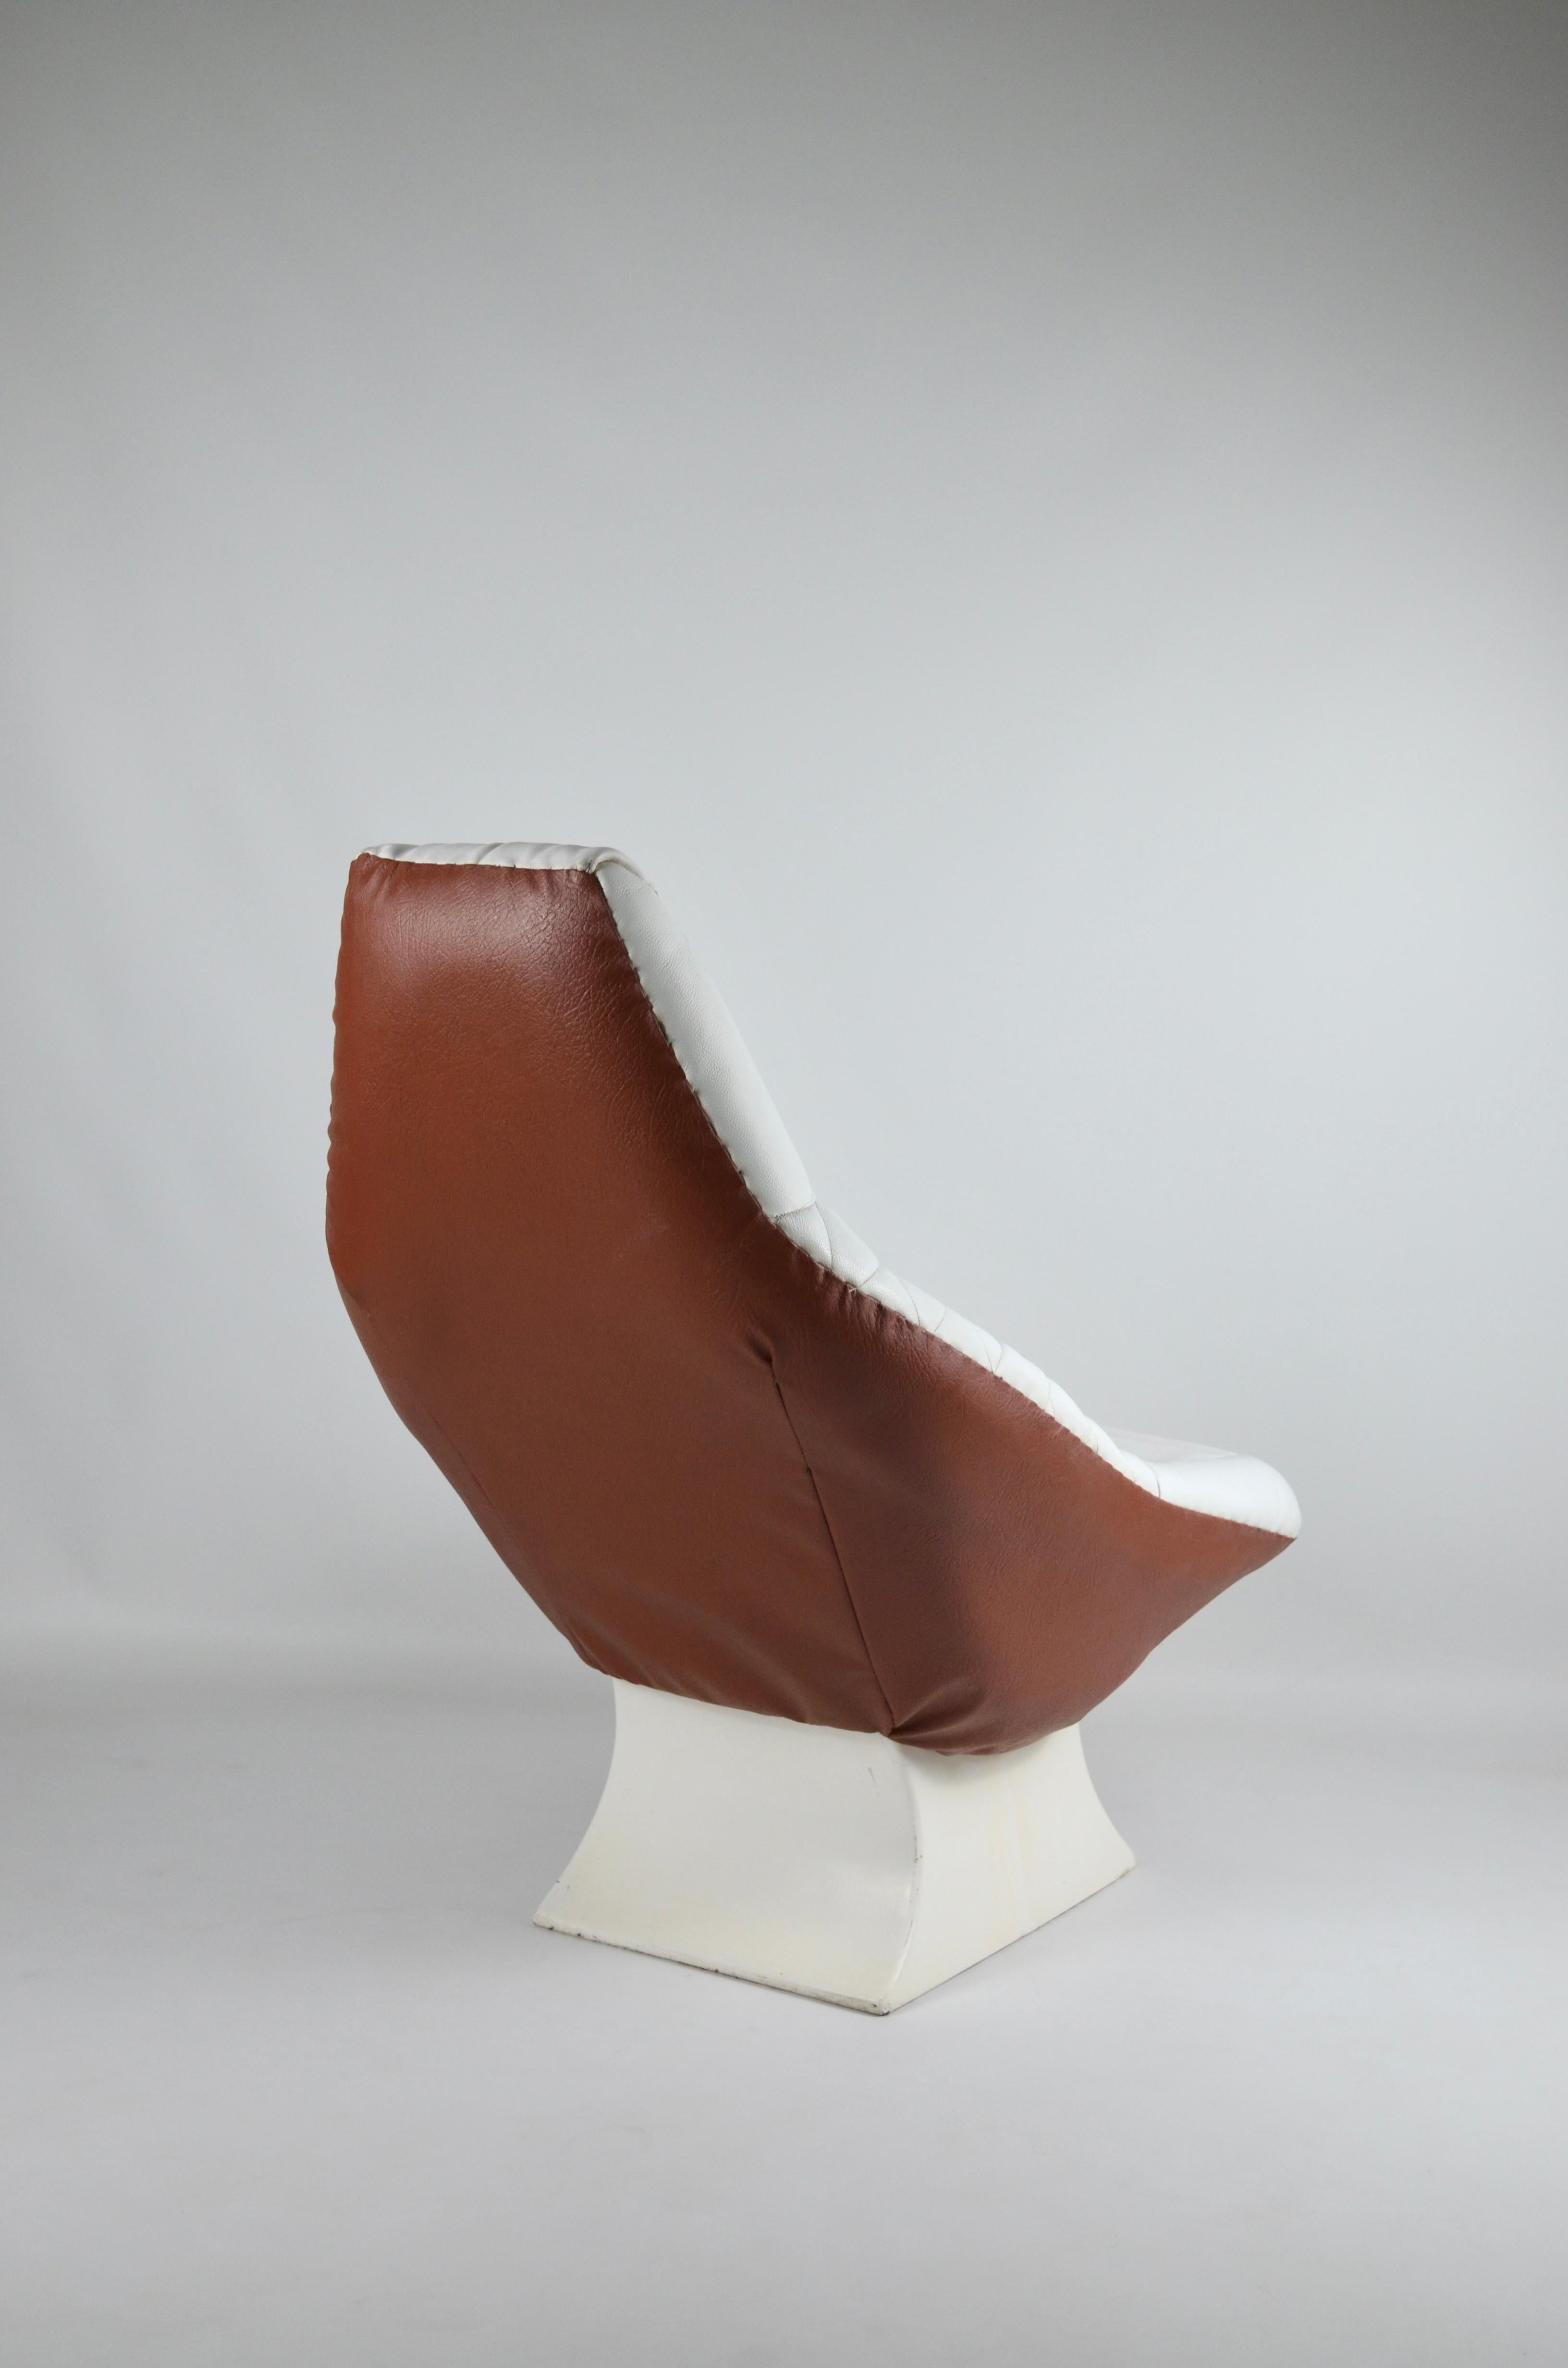 Space Age vintage space age armchair, leather and fiberglass, 1970's